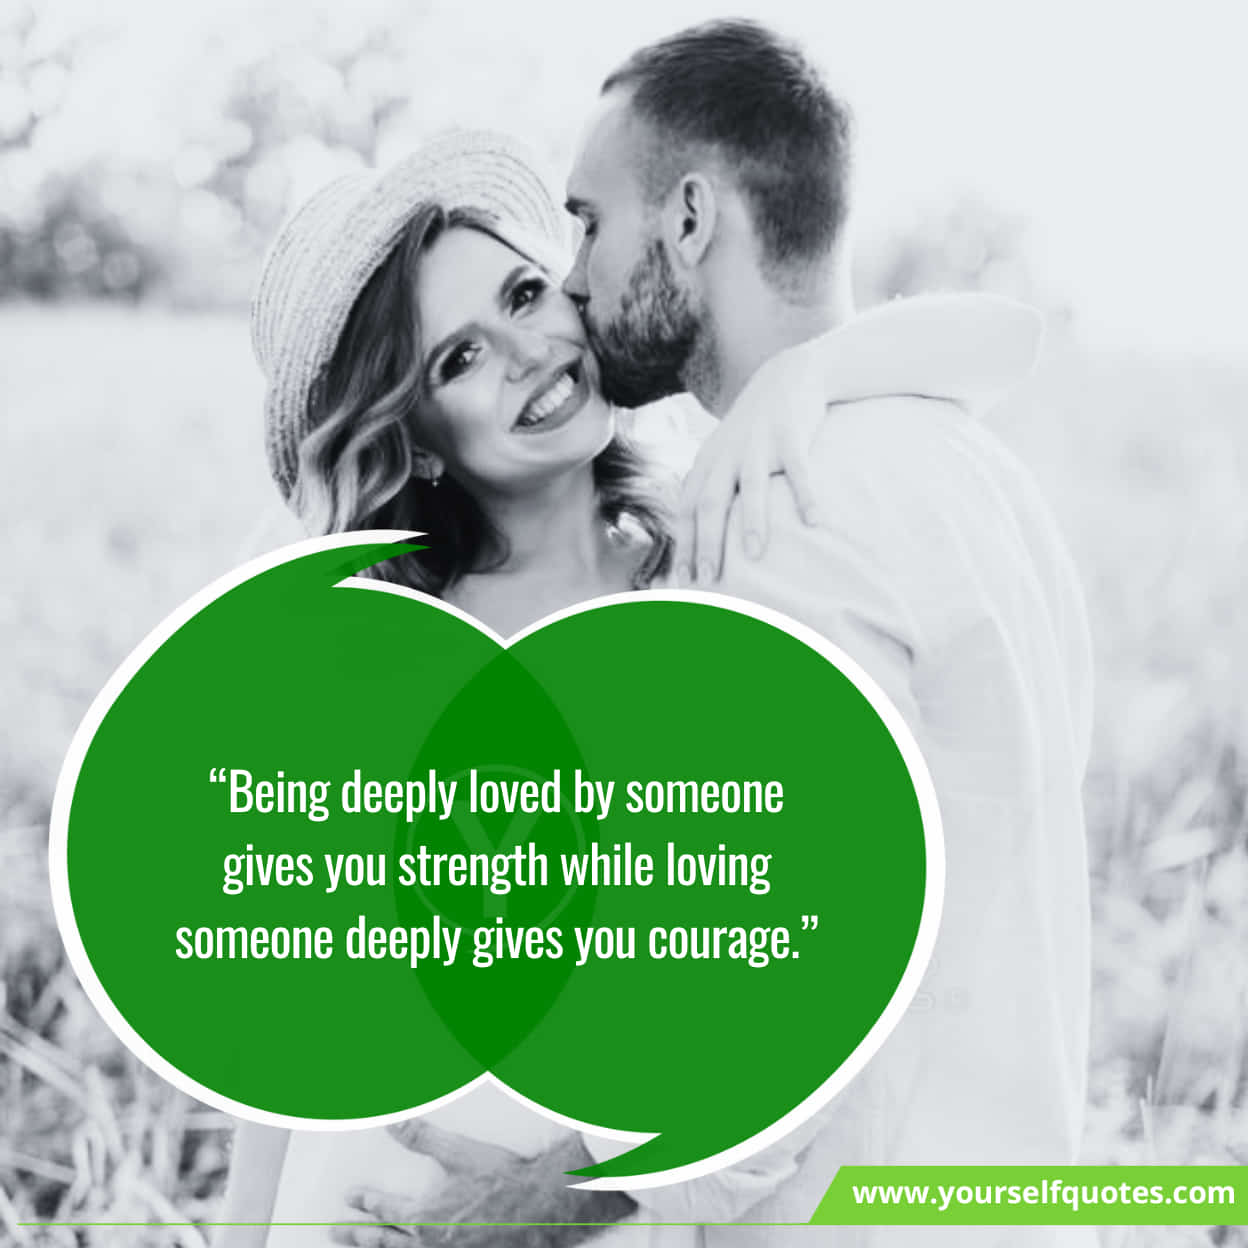 Relationship Quotes That Will Make True Relationship Your Life